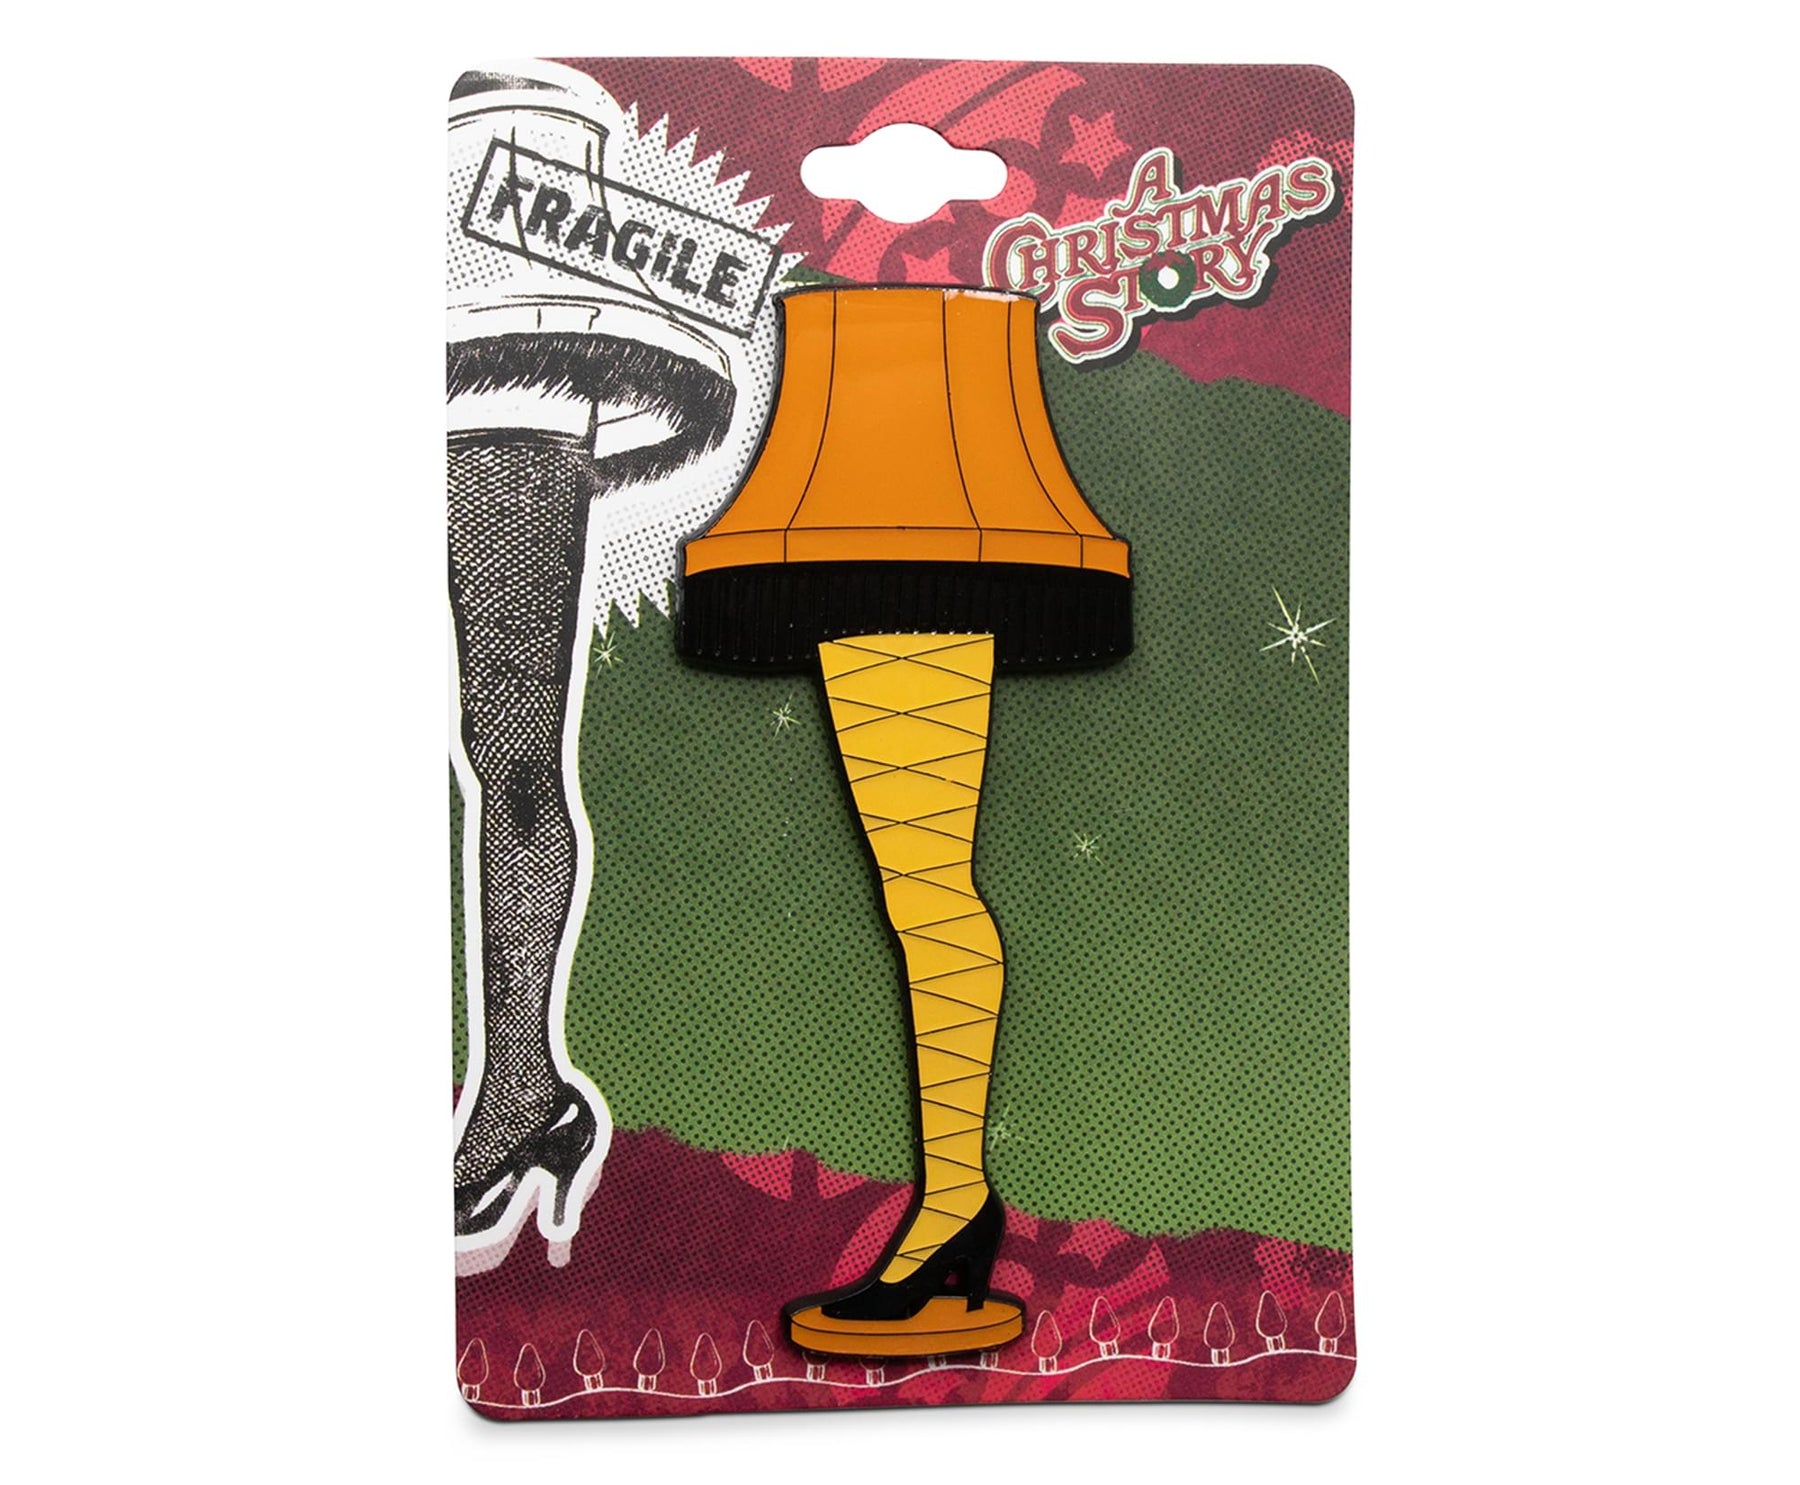 A Christmas Story Leg Lamp Collector Pin | Toynk Exclusive